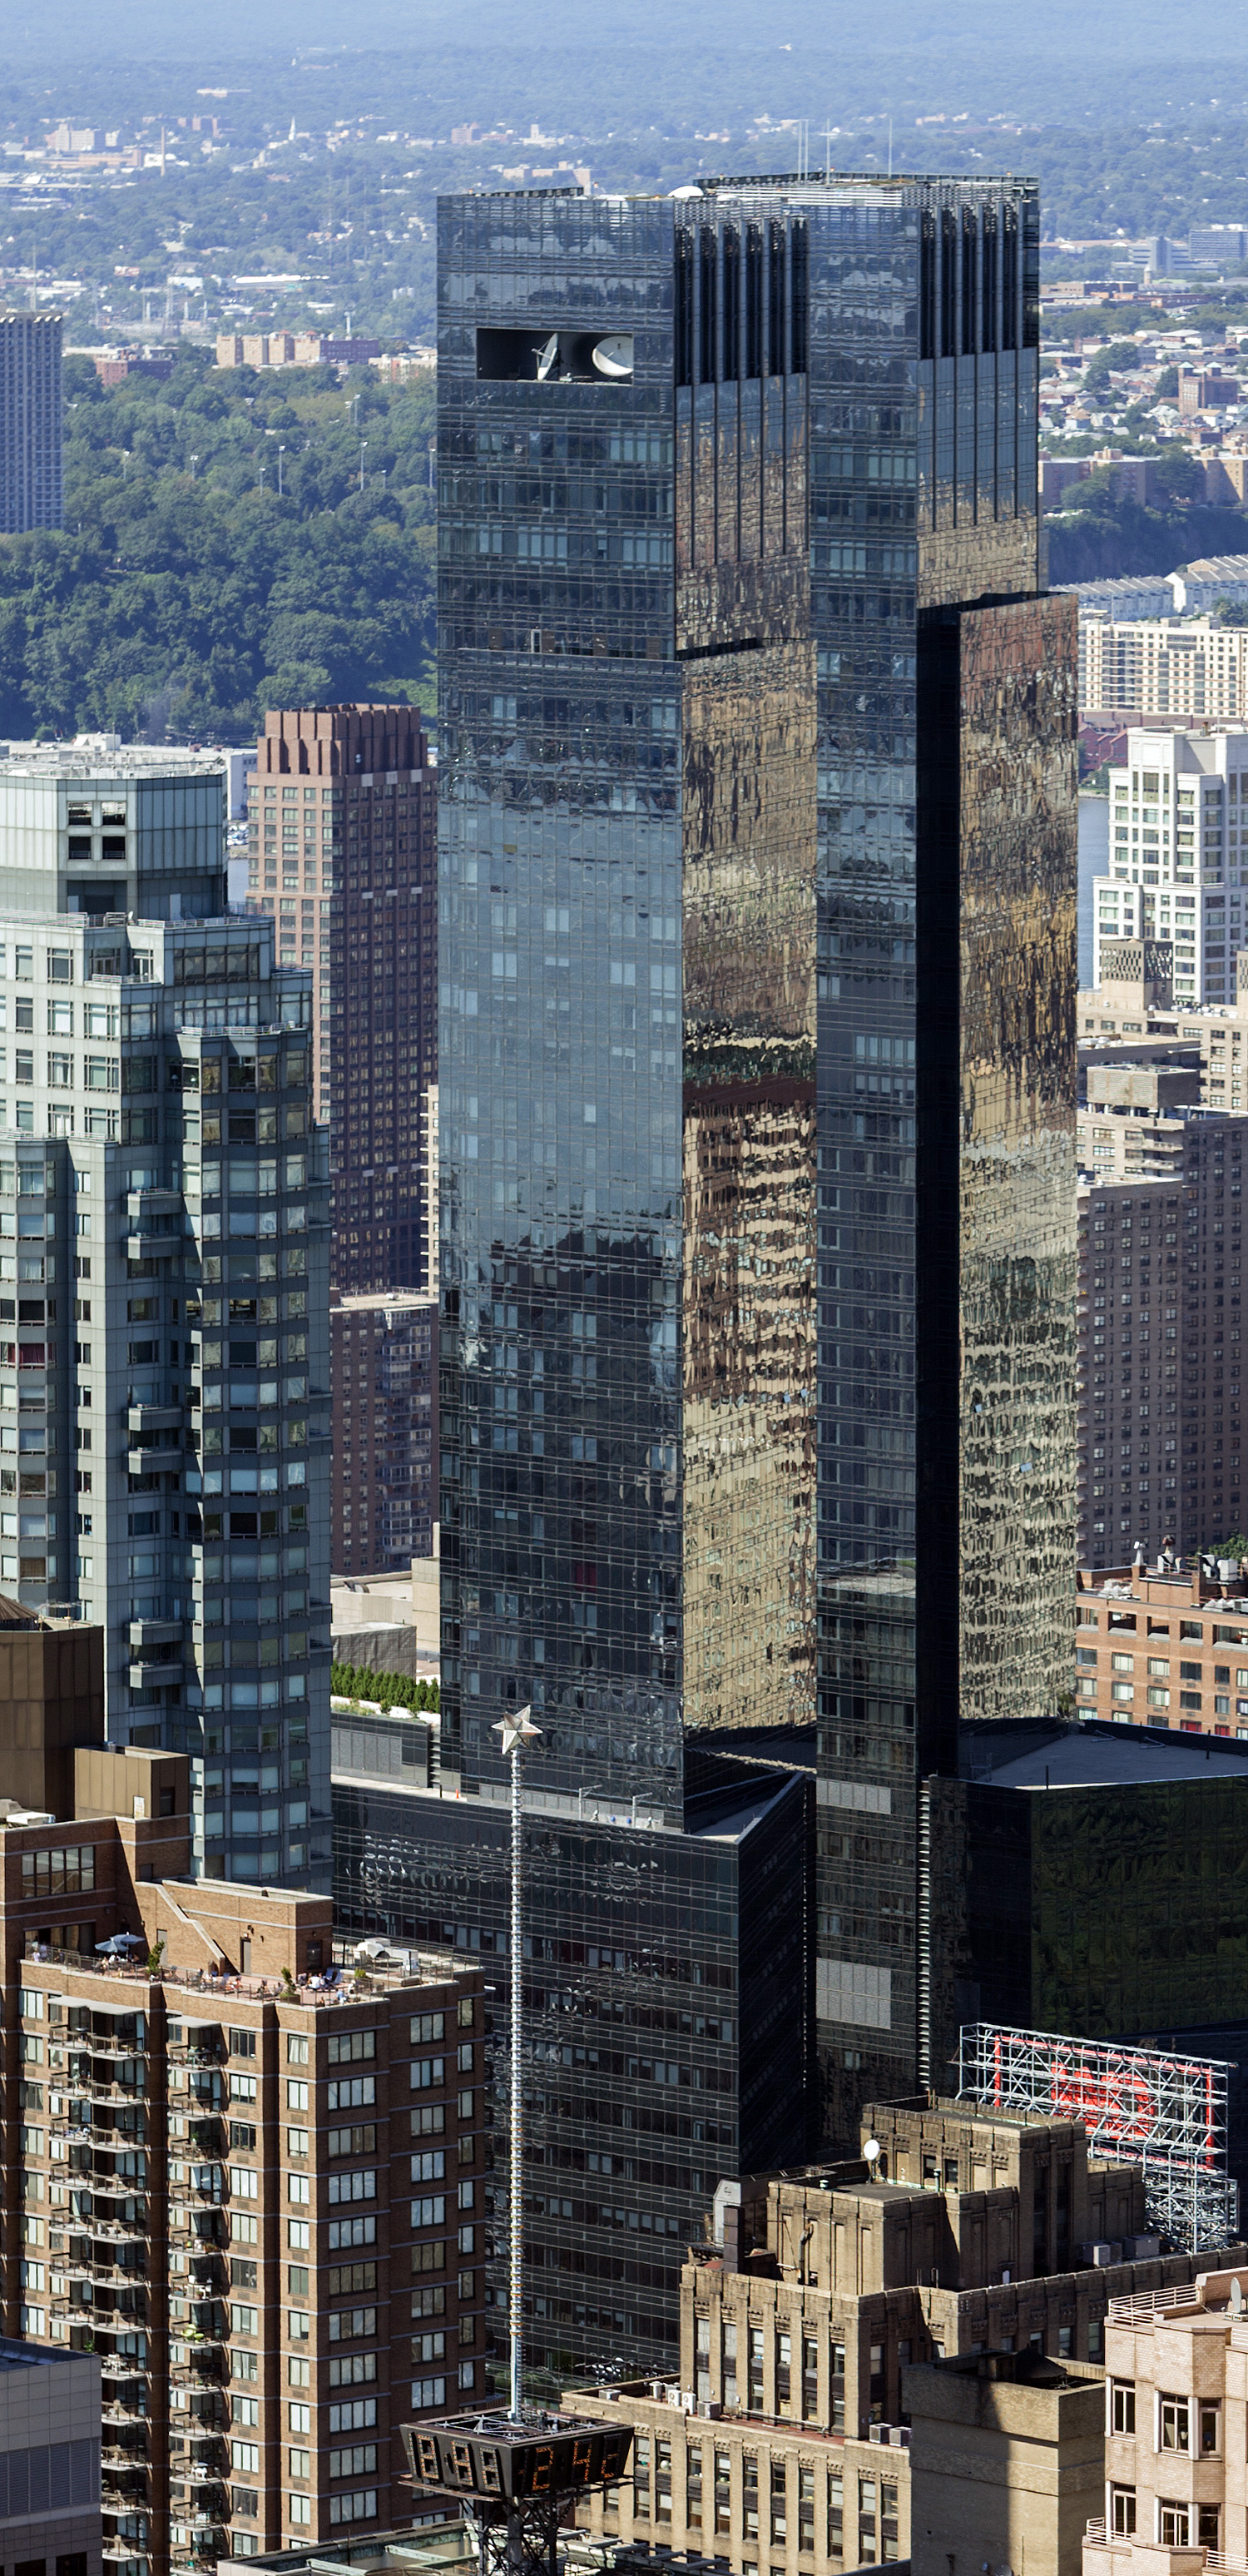 Deutsche Bank Center South Tower, New York City - View from Top of the Rock. © Mathias Beinling